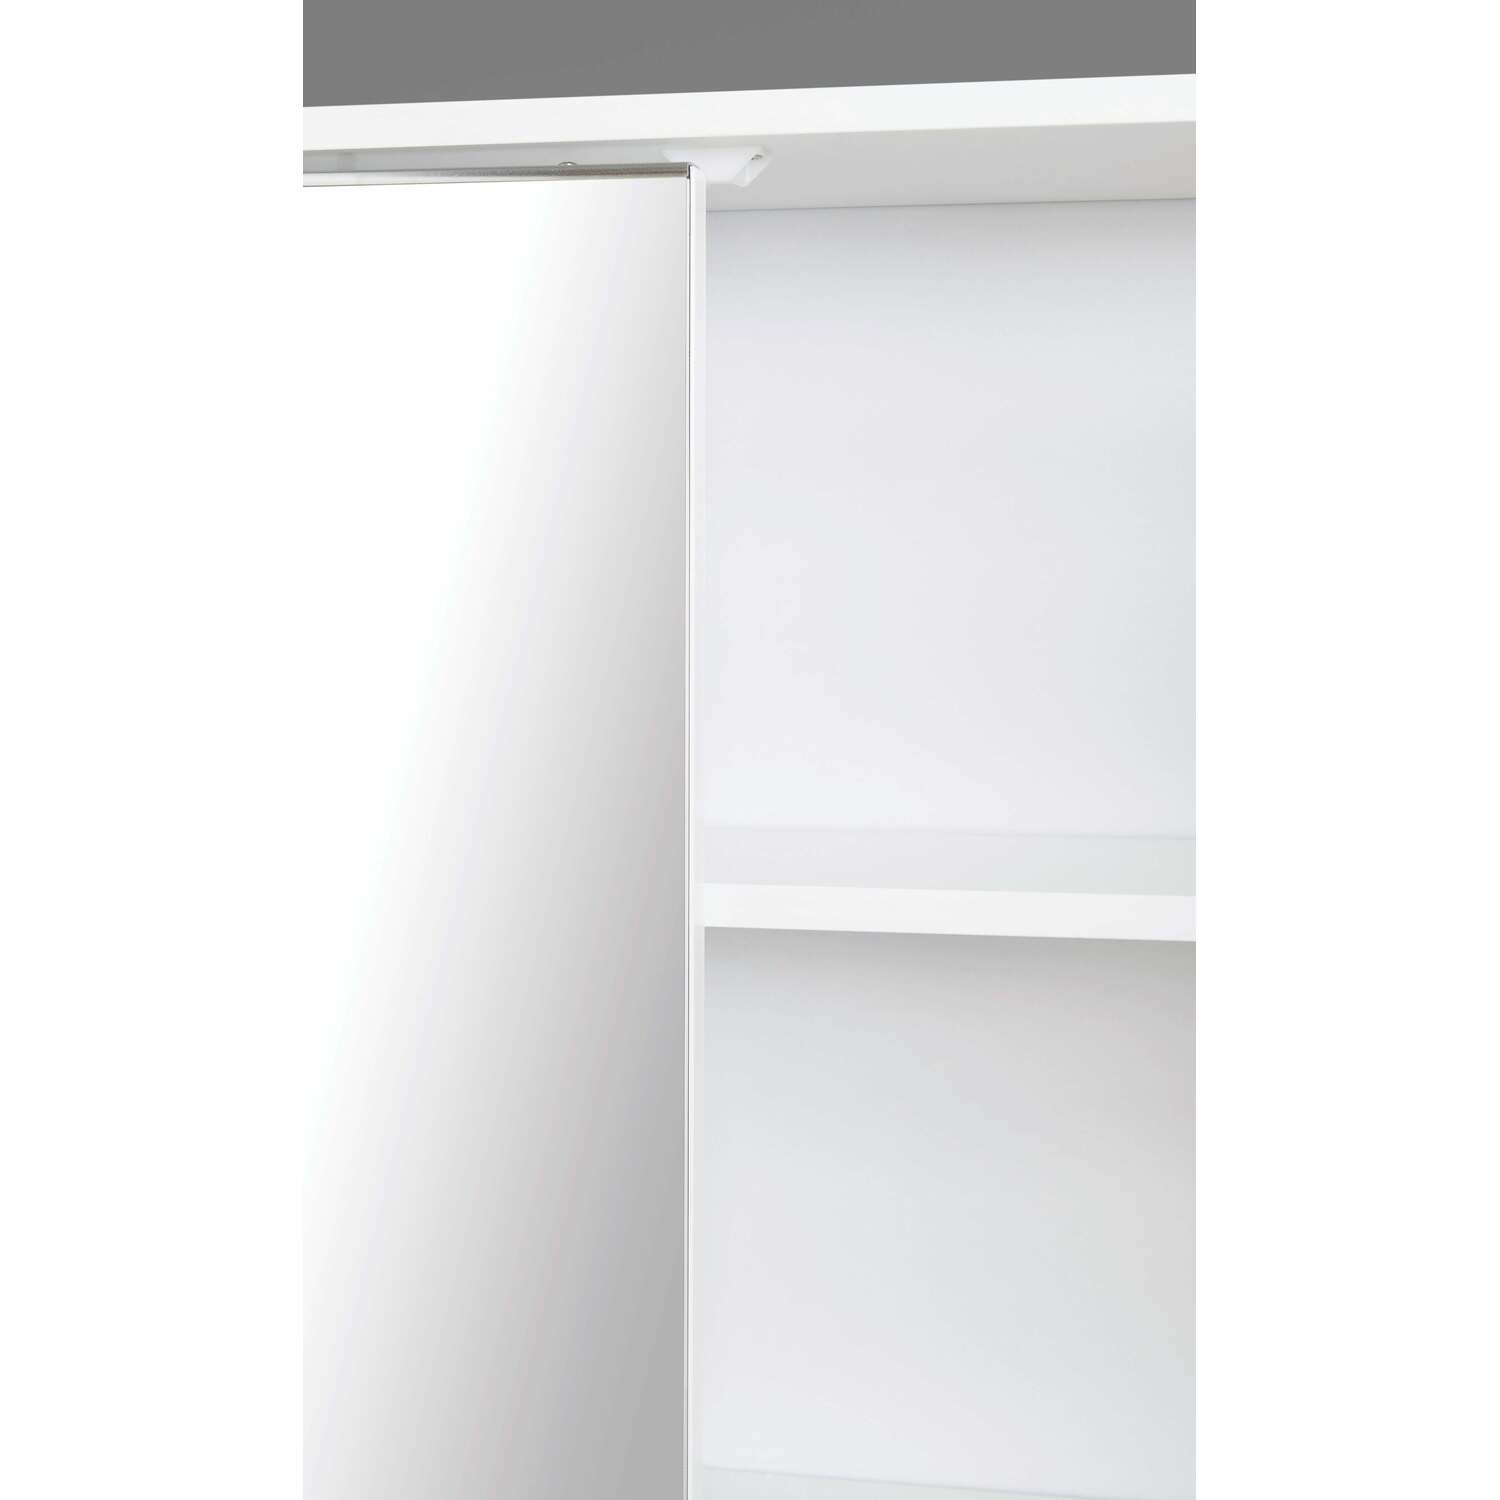 High Gloss Double Mirror Wall Cabinet - White Image 3